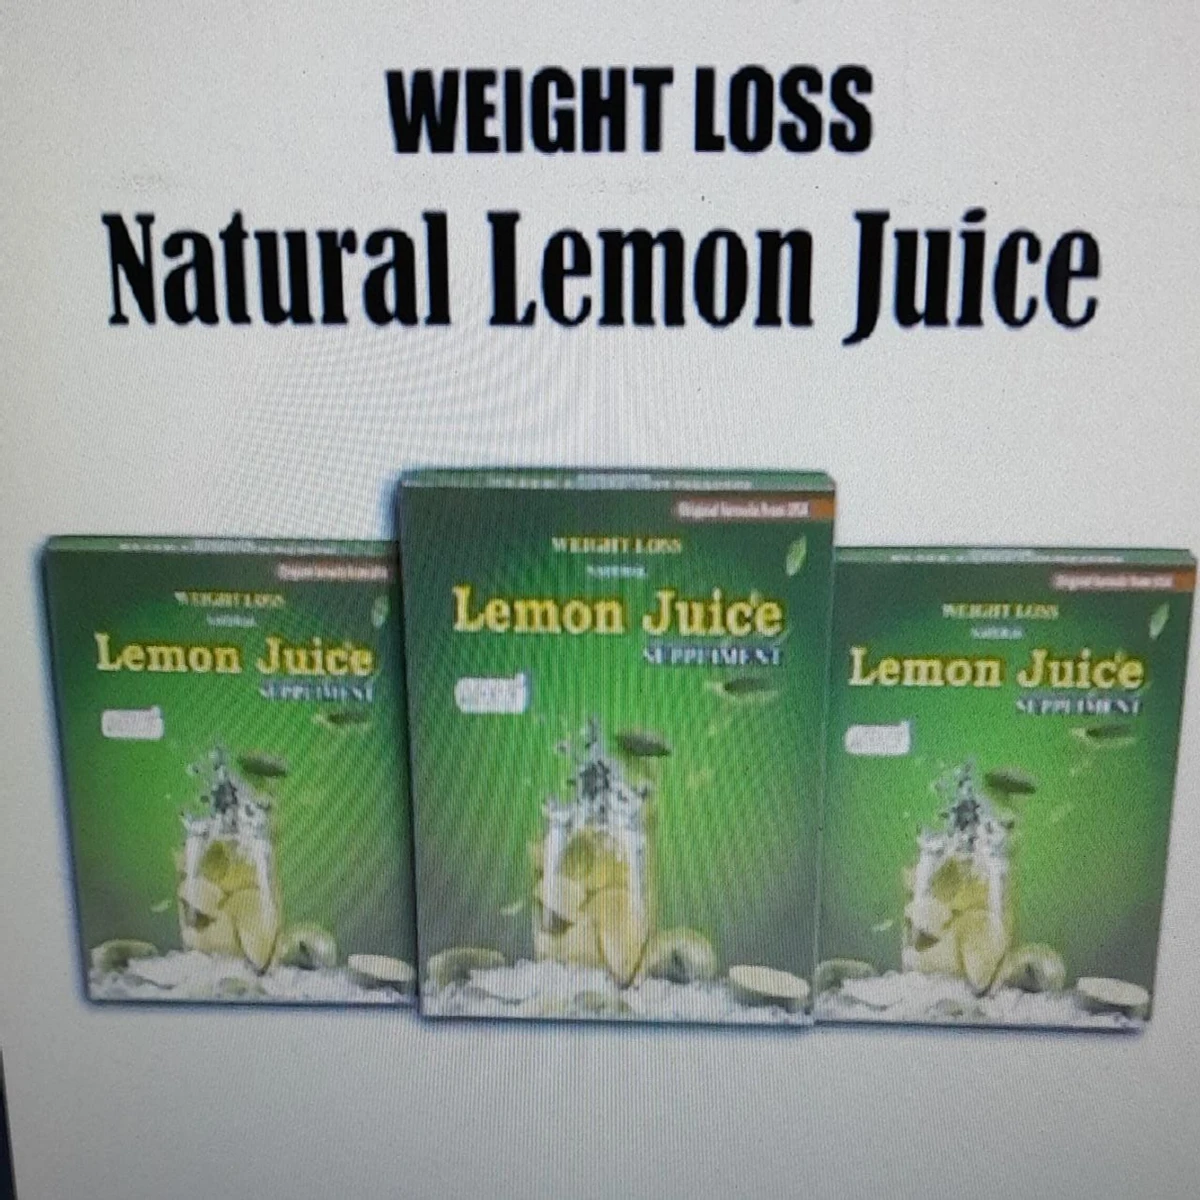 Natural Weight Loss Lemon Juice Supplements For Slim Body - 120gm